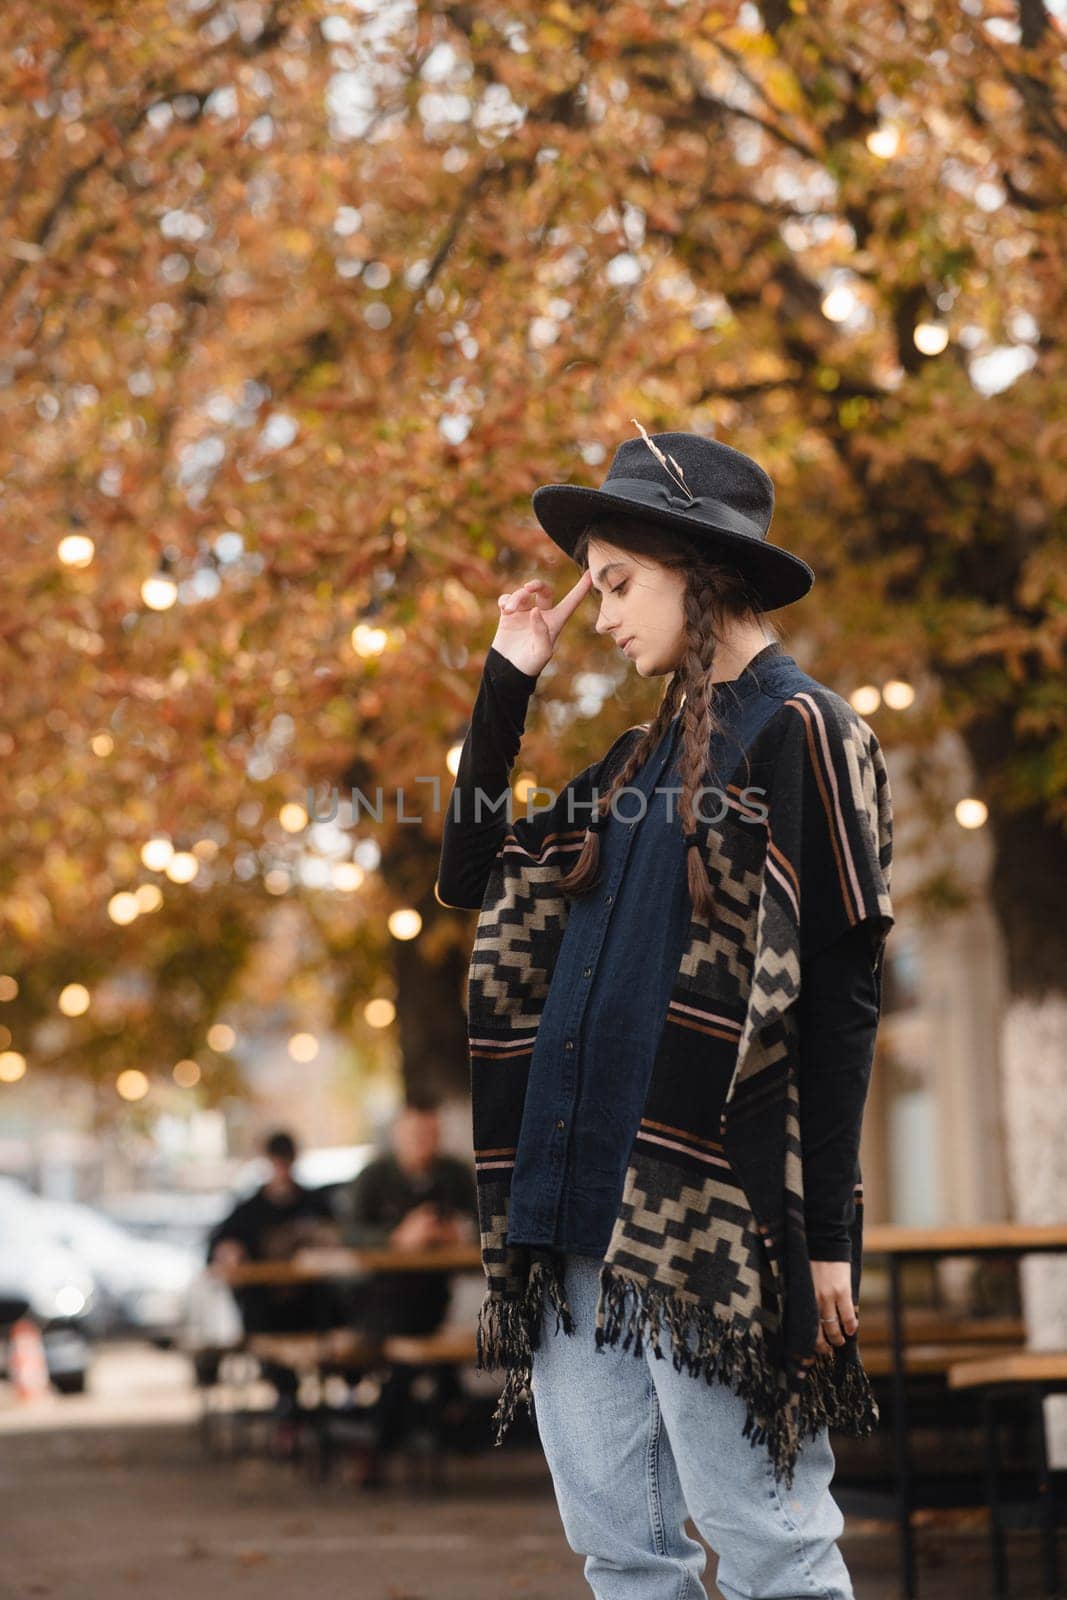 A radiant lady, embracing boho vibes, pairs her look with a black hat while exploring the autumn cityscape. High quality photo